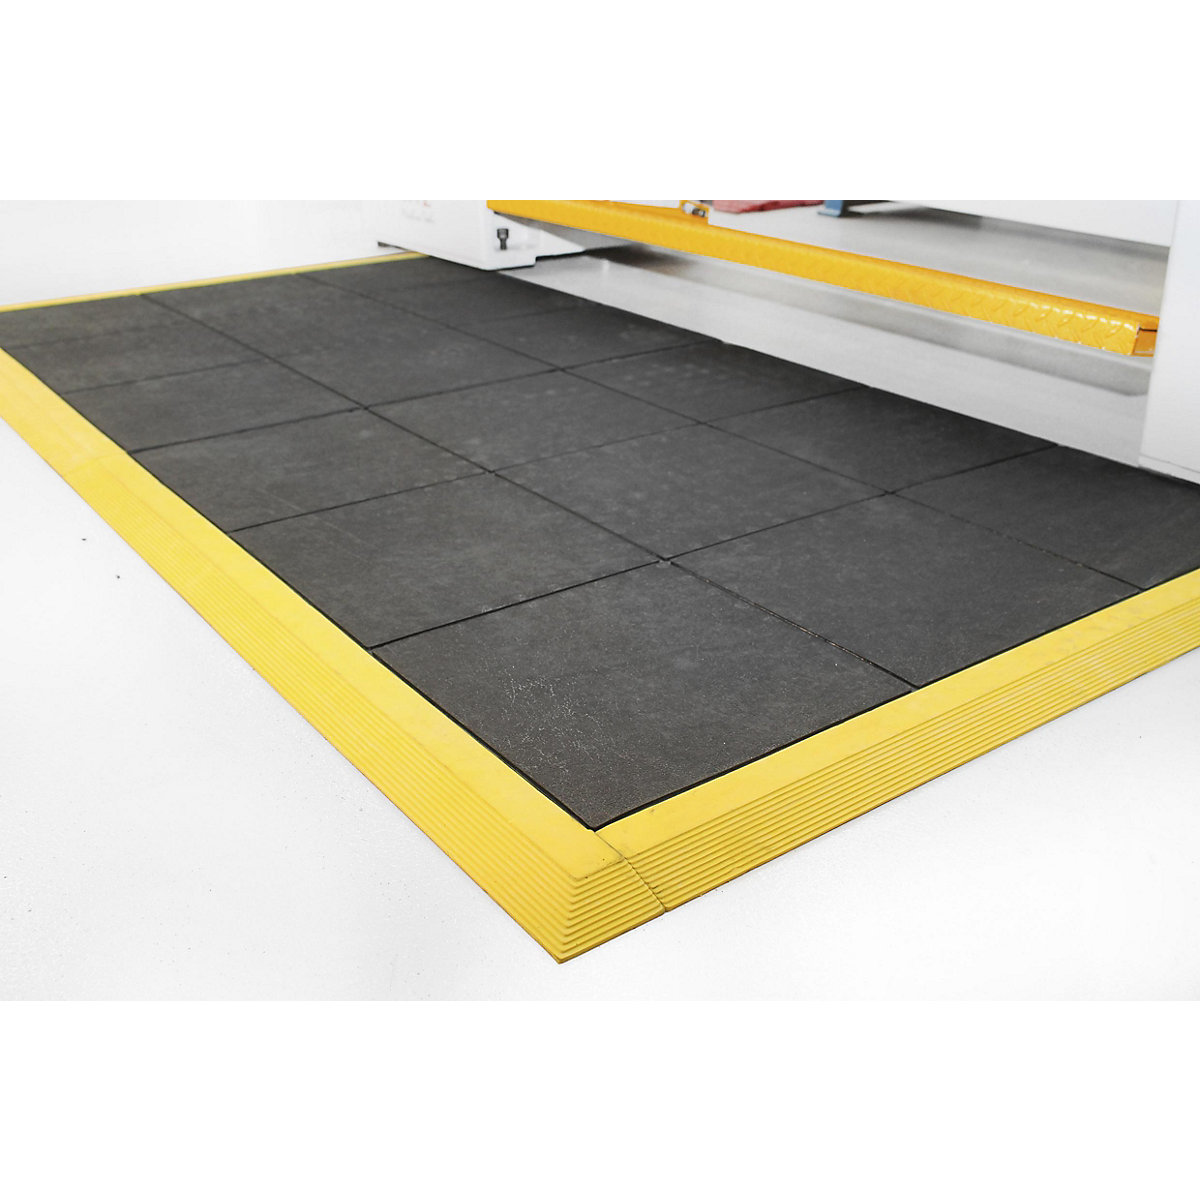 Fatigue-Step workstation floor covering, with closed surface, nitrile rubber, 900 x 900 mm, black